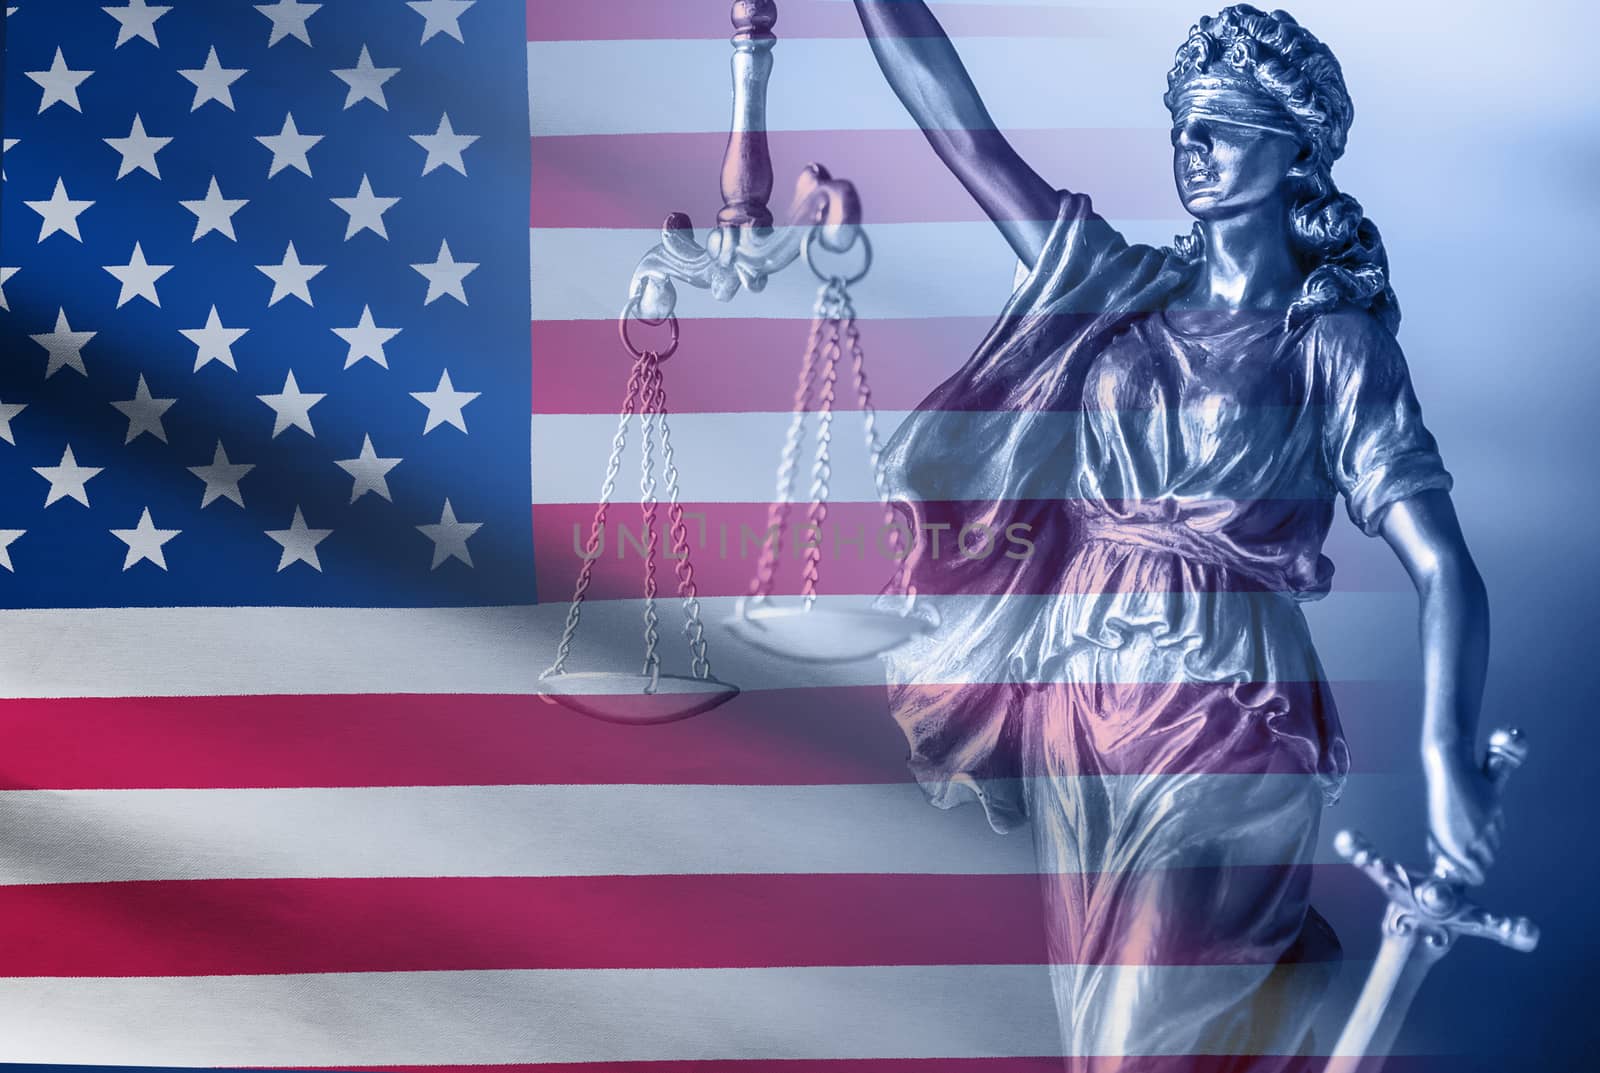 Composite image of Justice holding scales and a sword over the Stars and Stripes USA flag